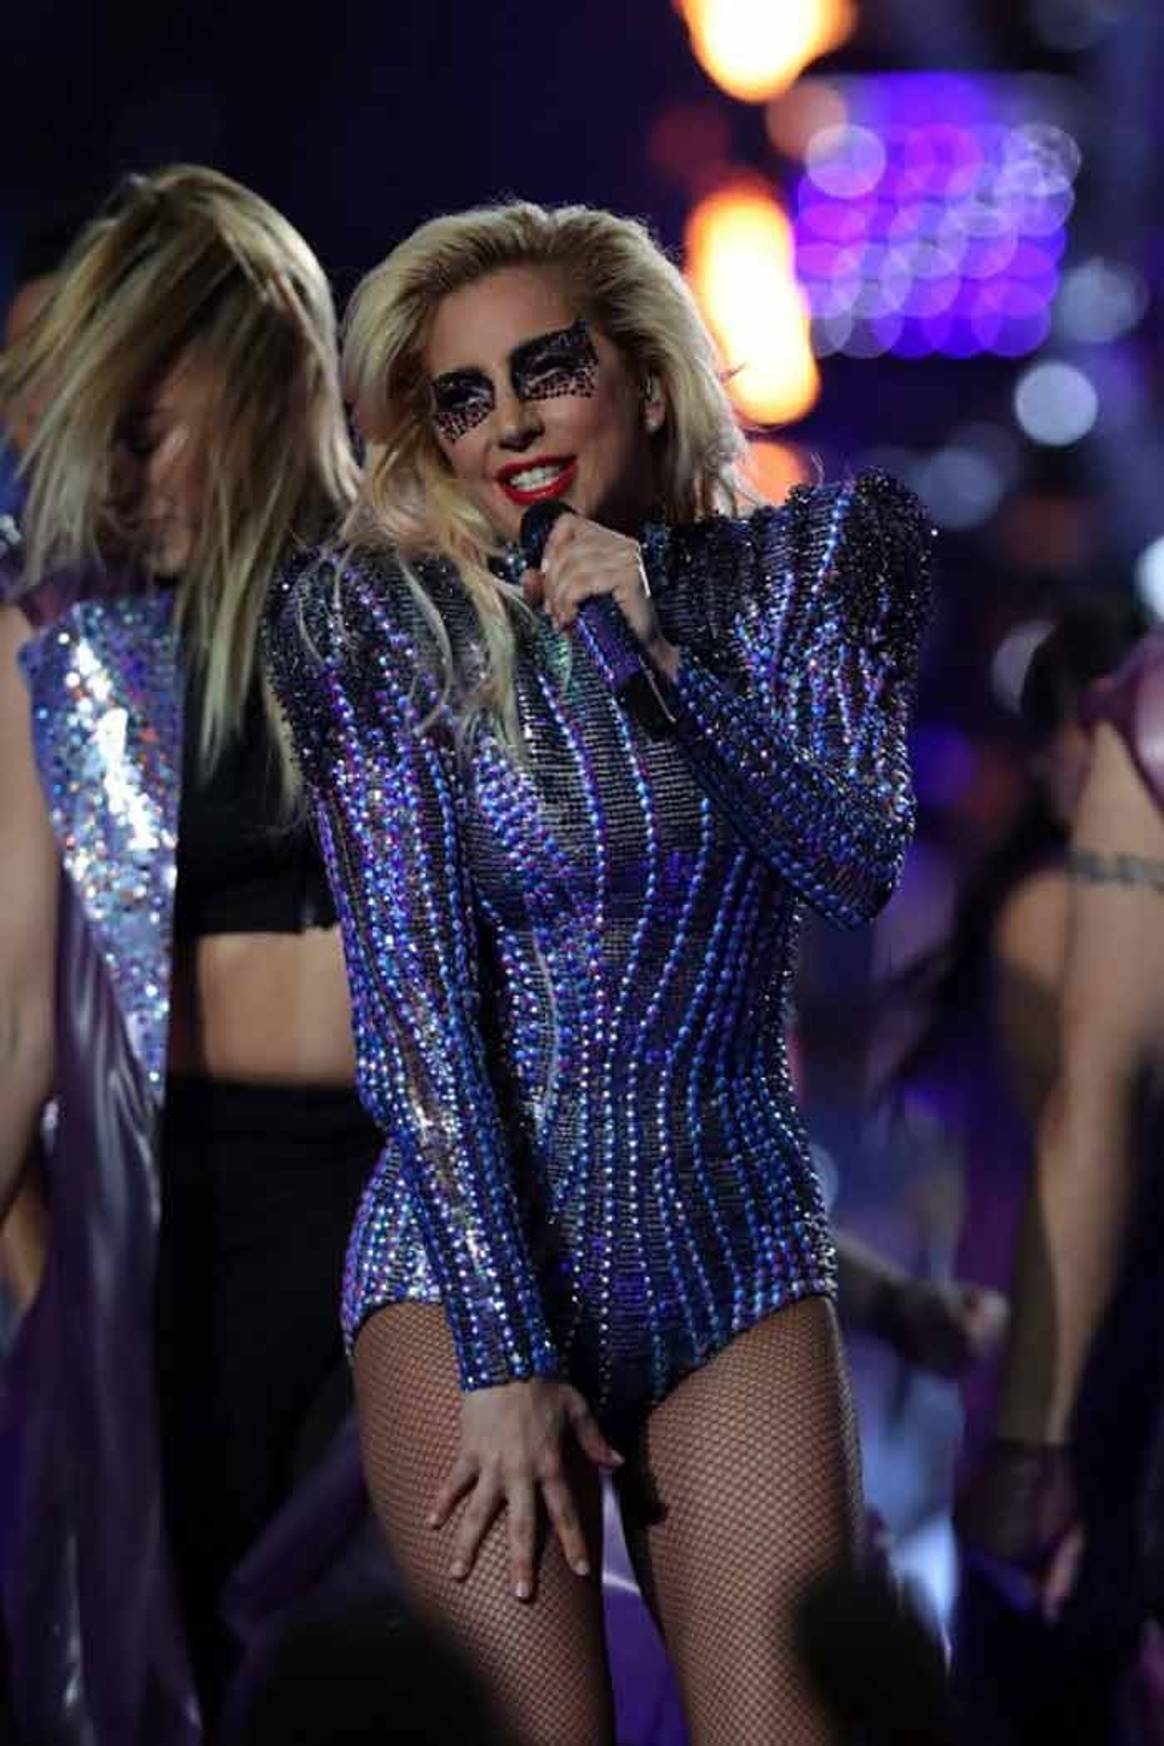 In Pictures: Lady Gaga wears Atelier Versace during Super Bowl performance